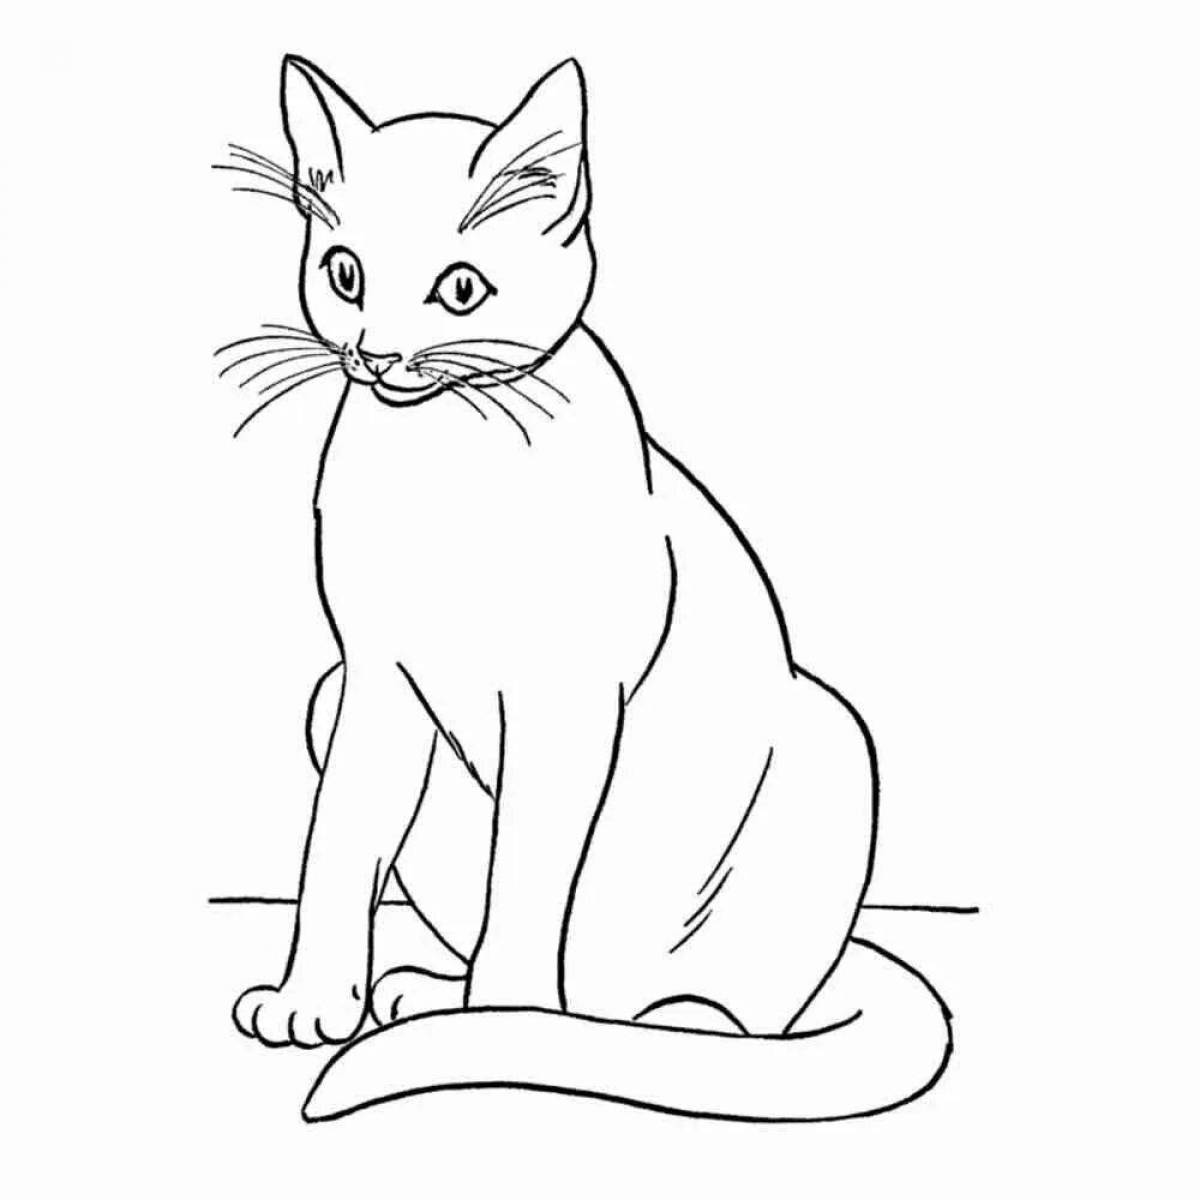 Charming cats coloring book